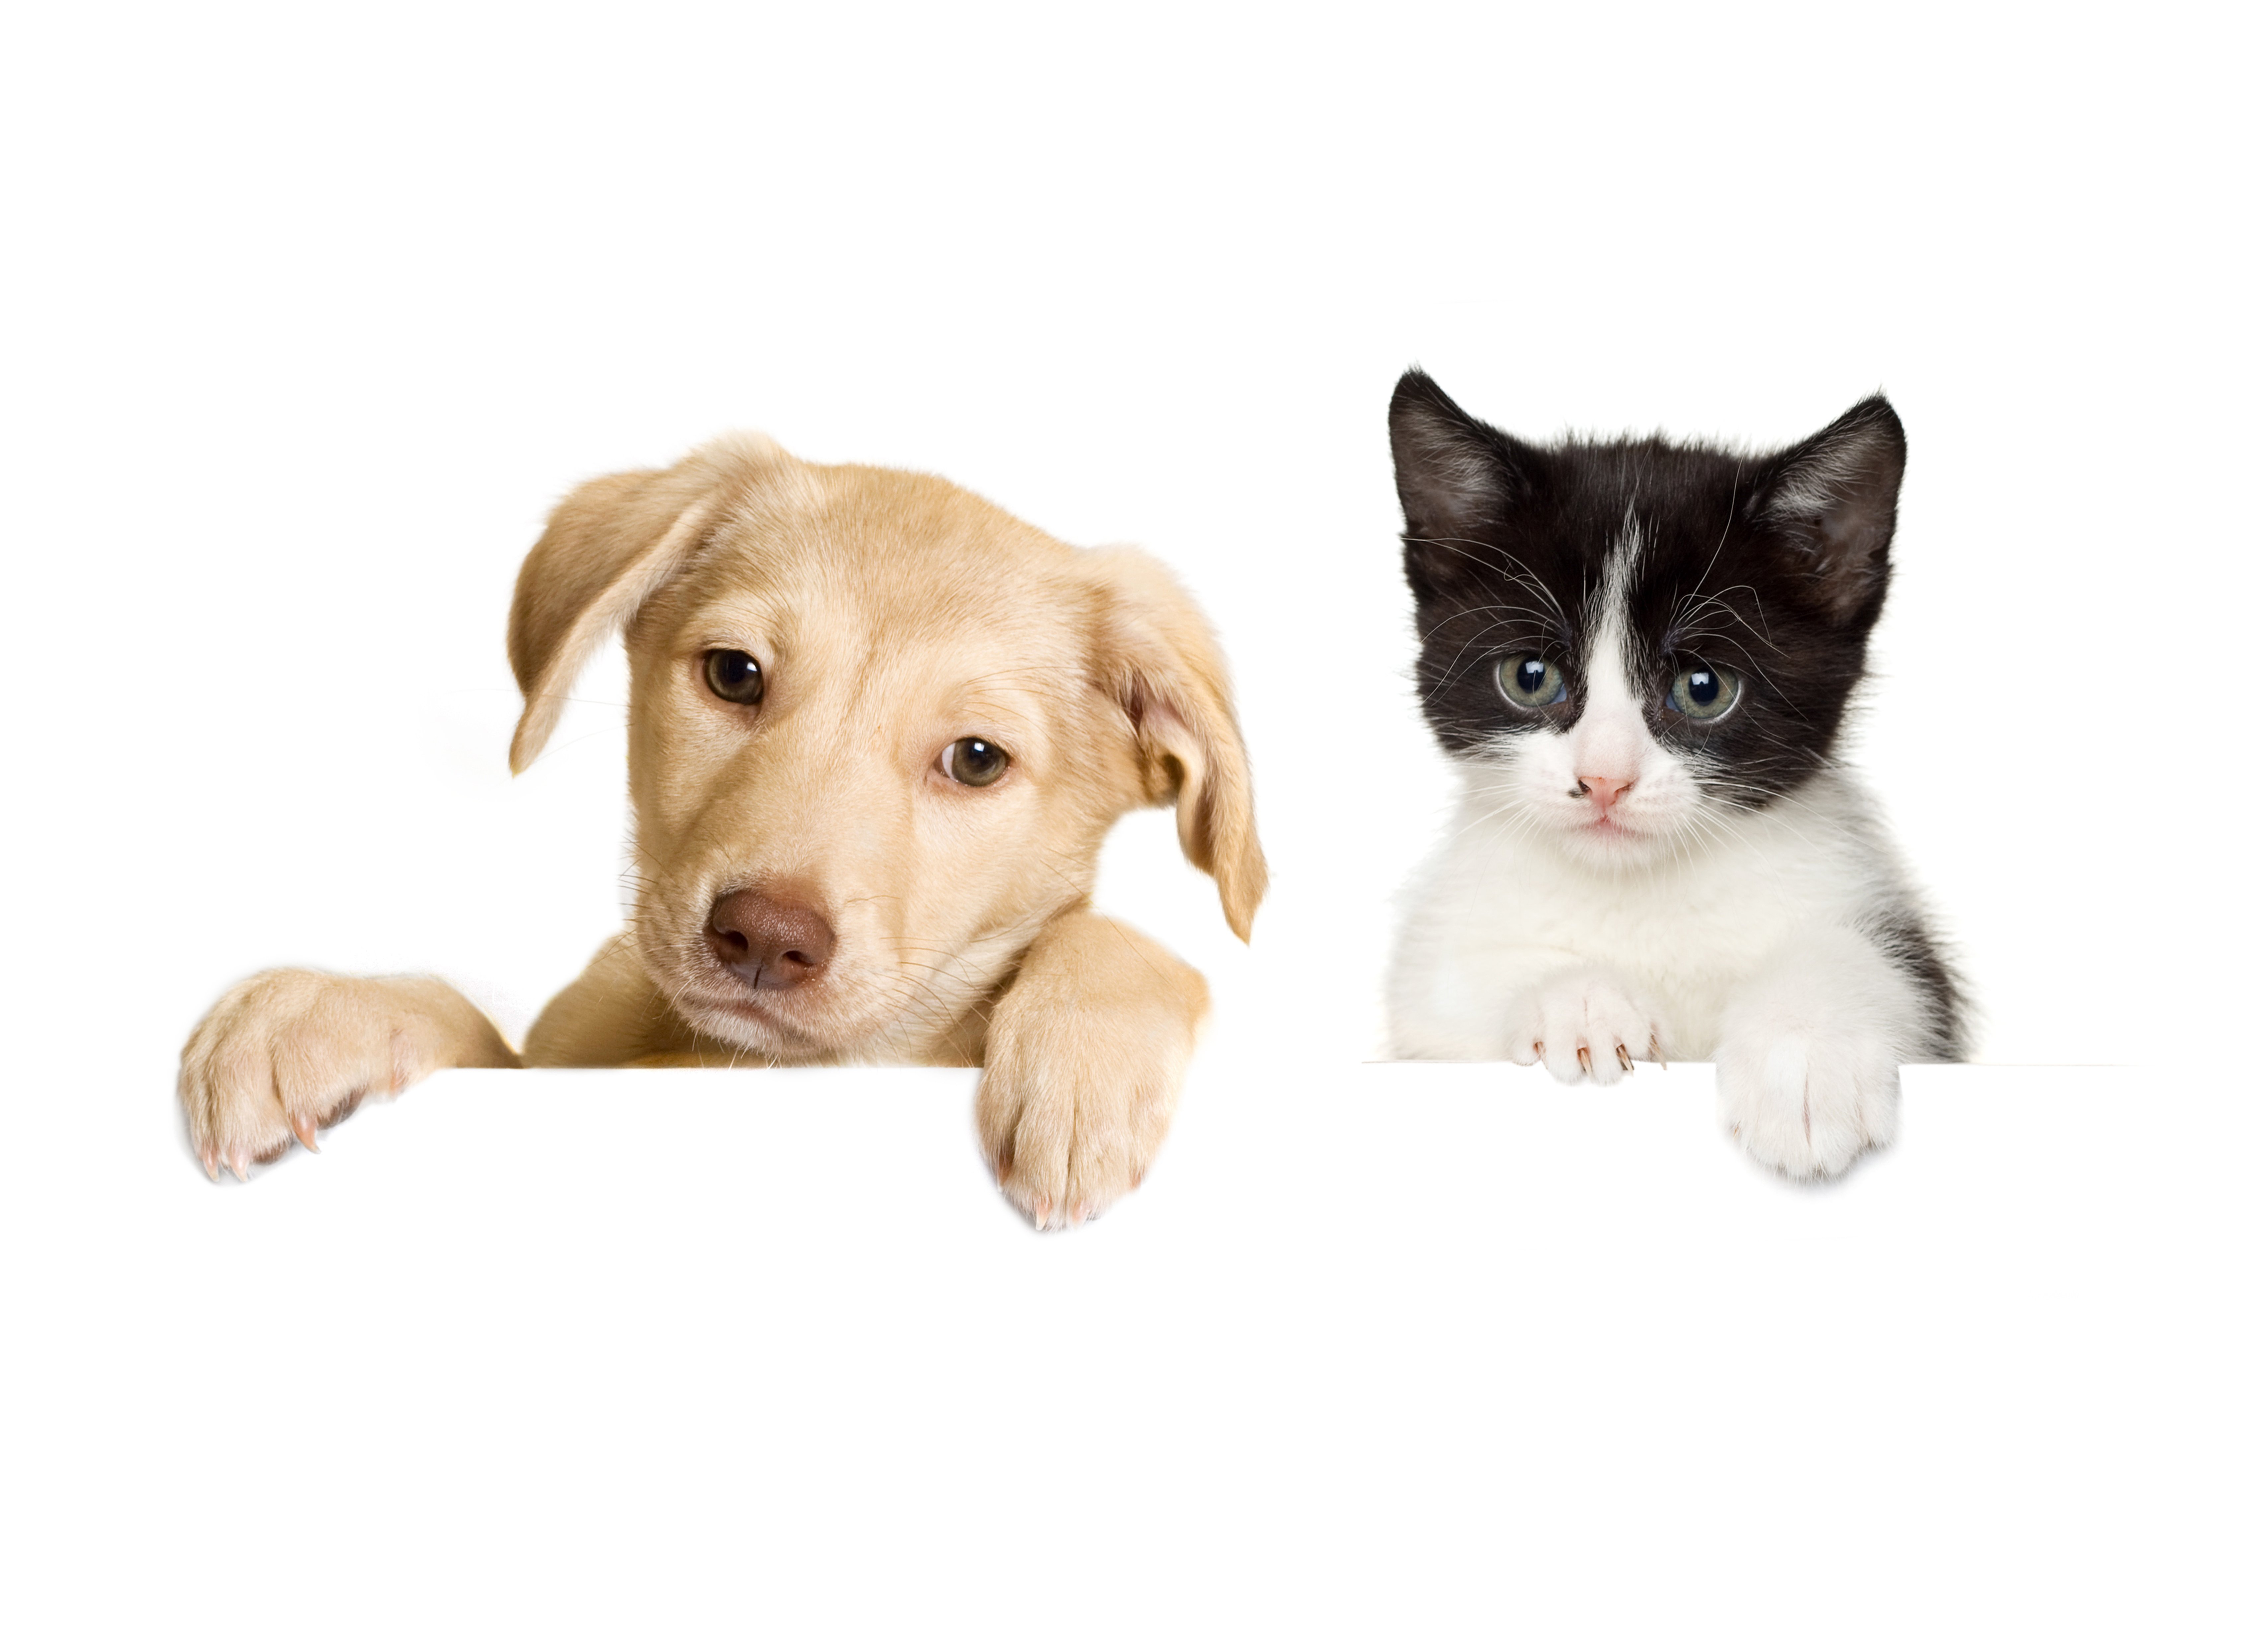 Cat And Dog Wallpaper High Quality